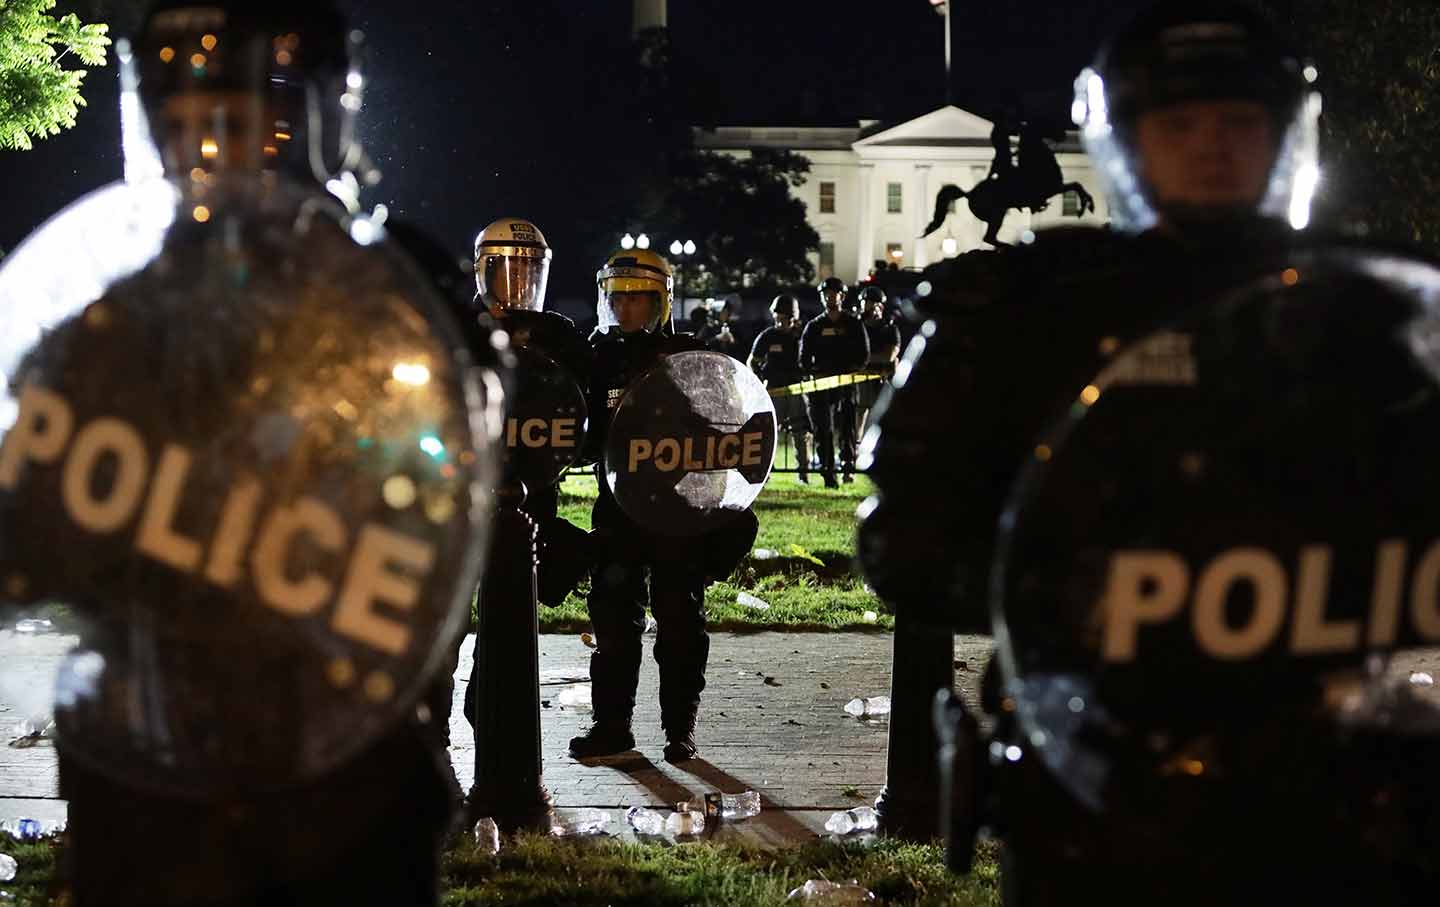 Police at a protest in Washington, DC